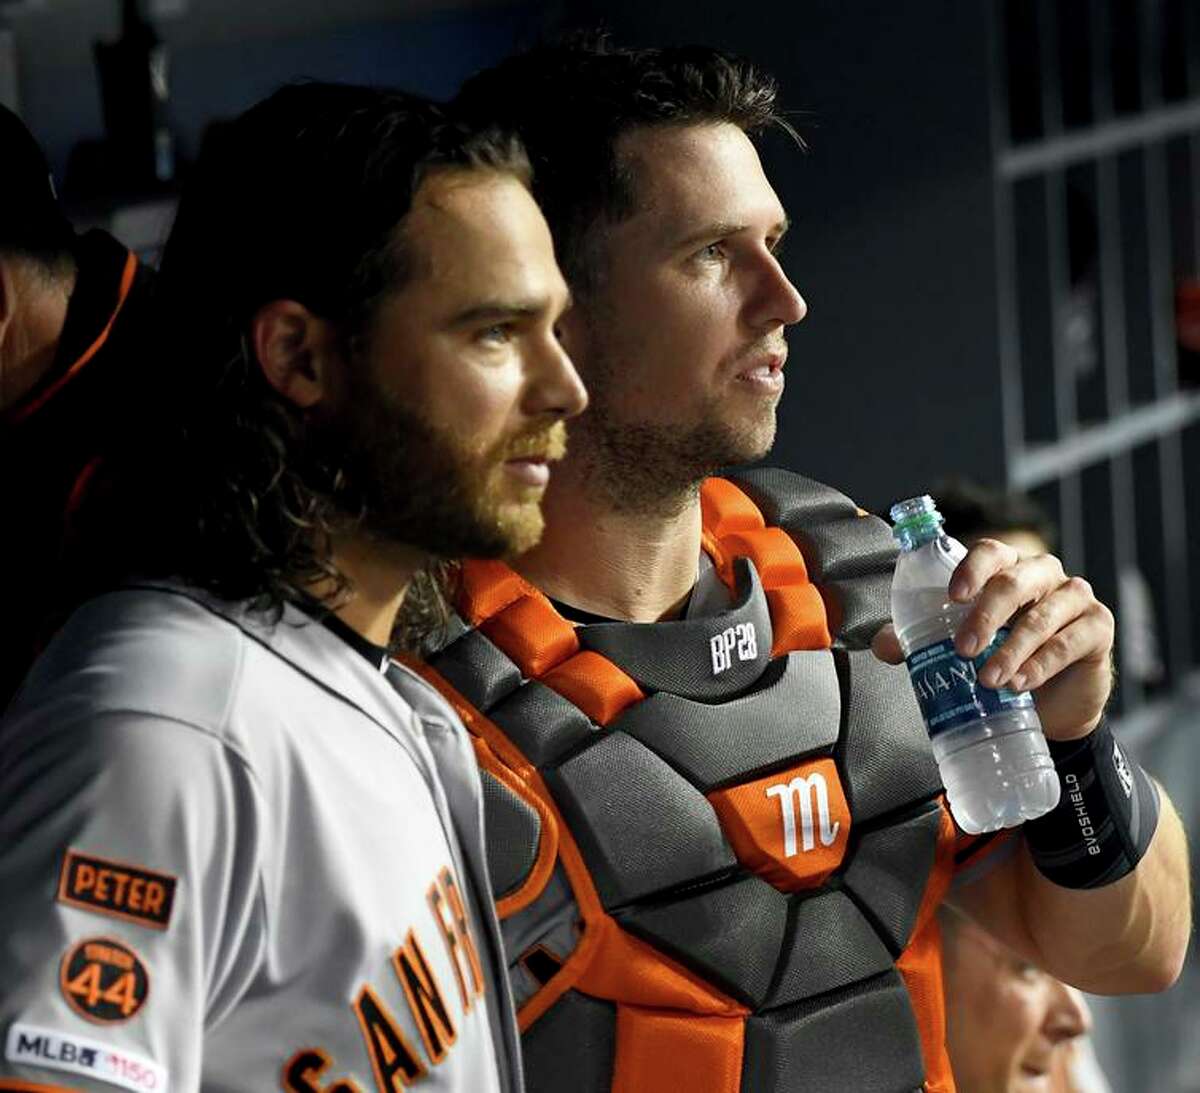 LOS ANGELES, CA - APRIL 01: Brandon Crawford #35 and Buster Posey #28 of the San Francisco Giants look on from the dugout during the game against the Los Angeles Dodgers at Dodger Stadium on April 1, 2019 in Los Angeles, California. (Photo by Jayne Kamin-Oncea/Getty Images)